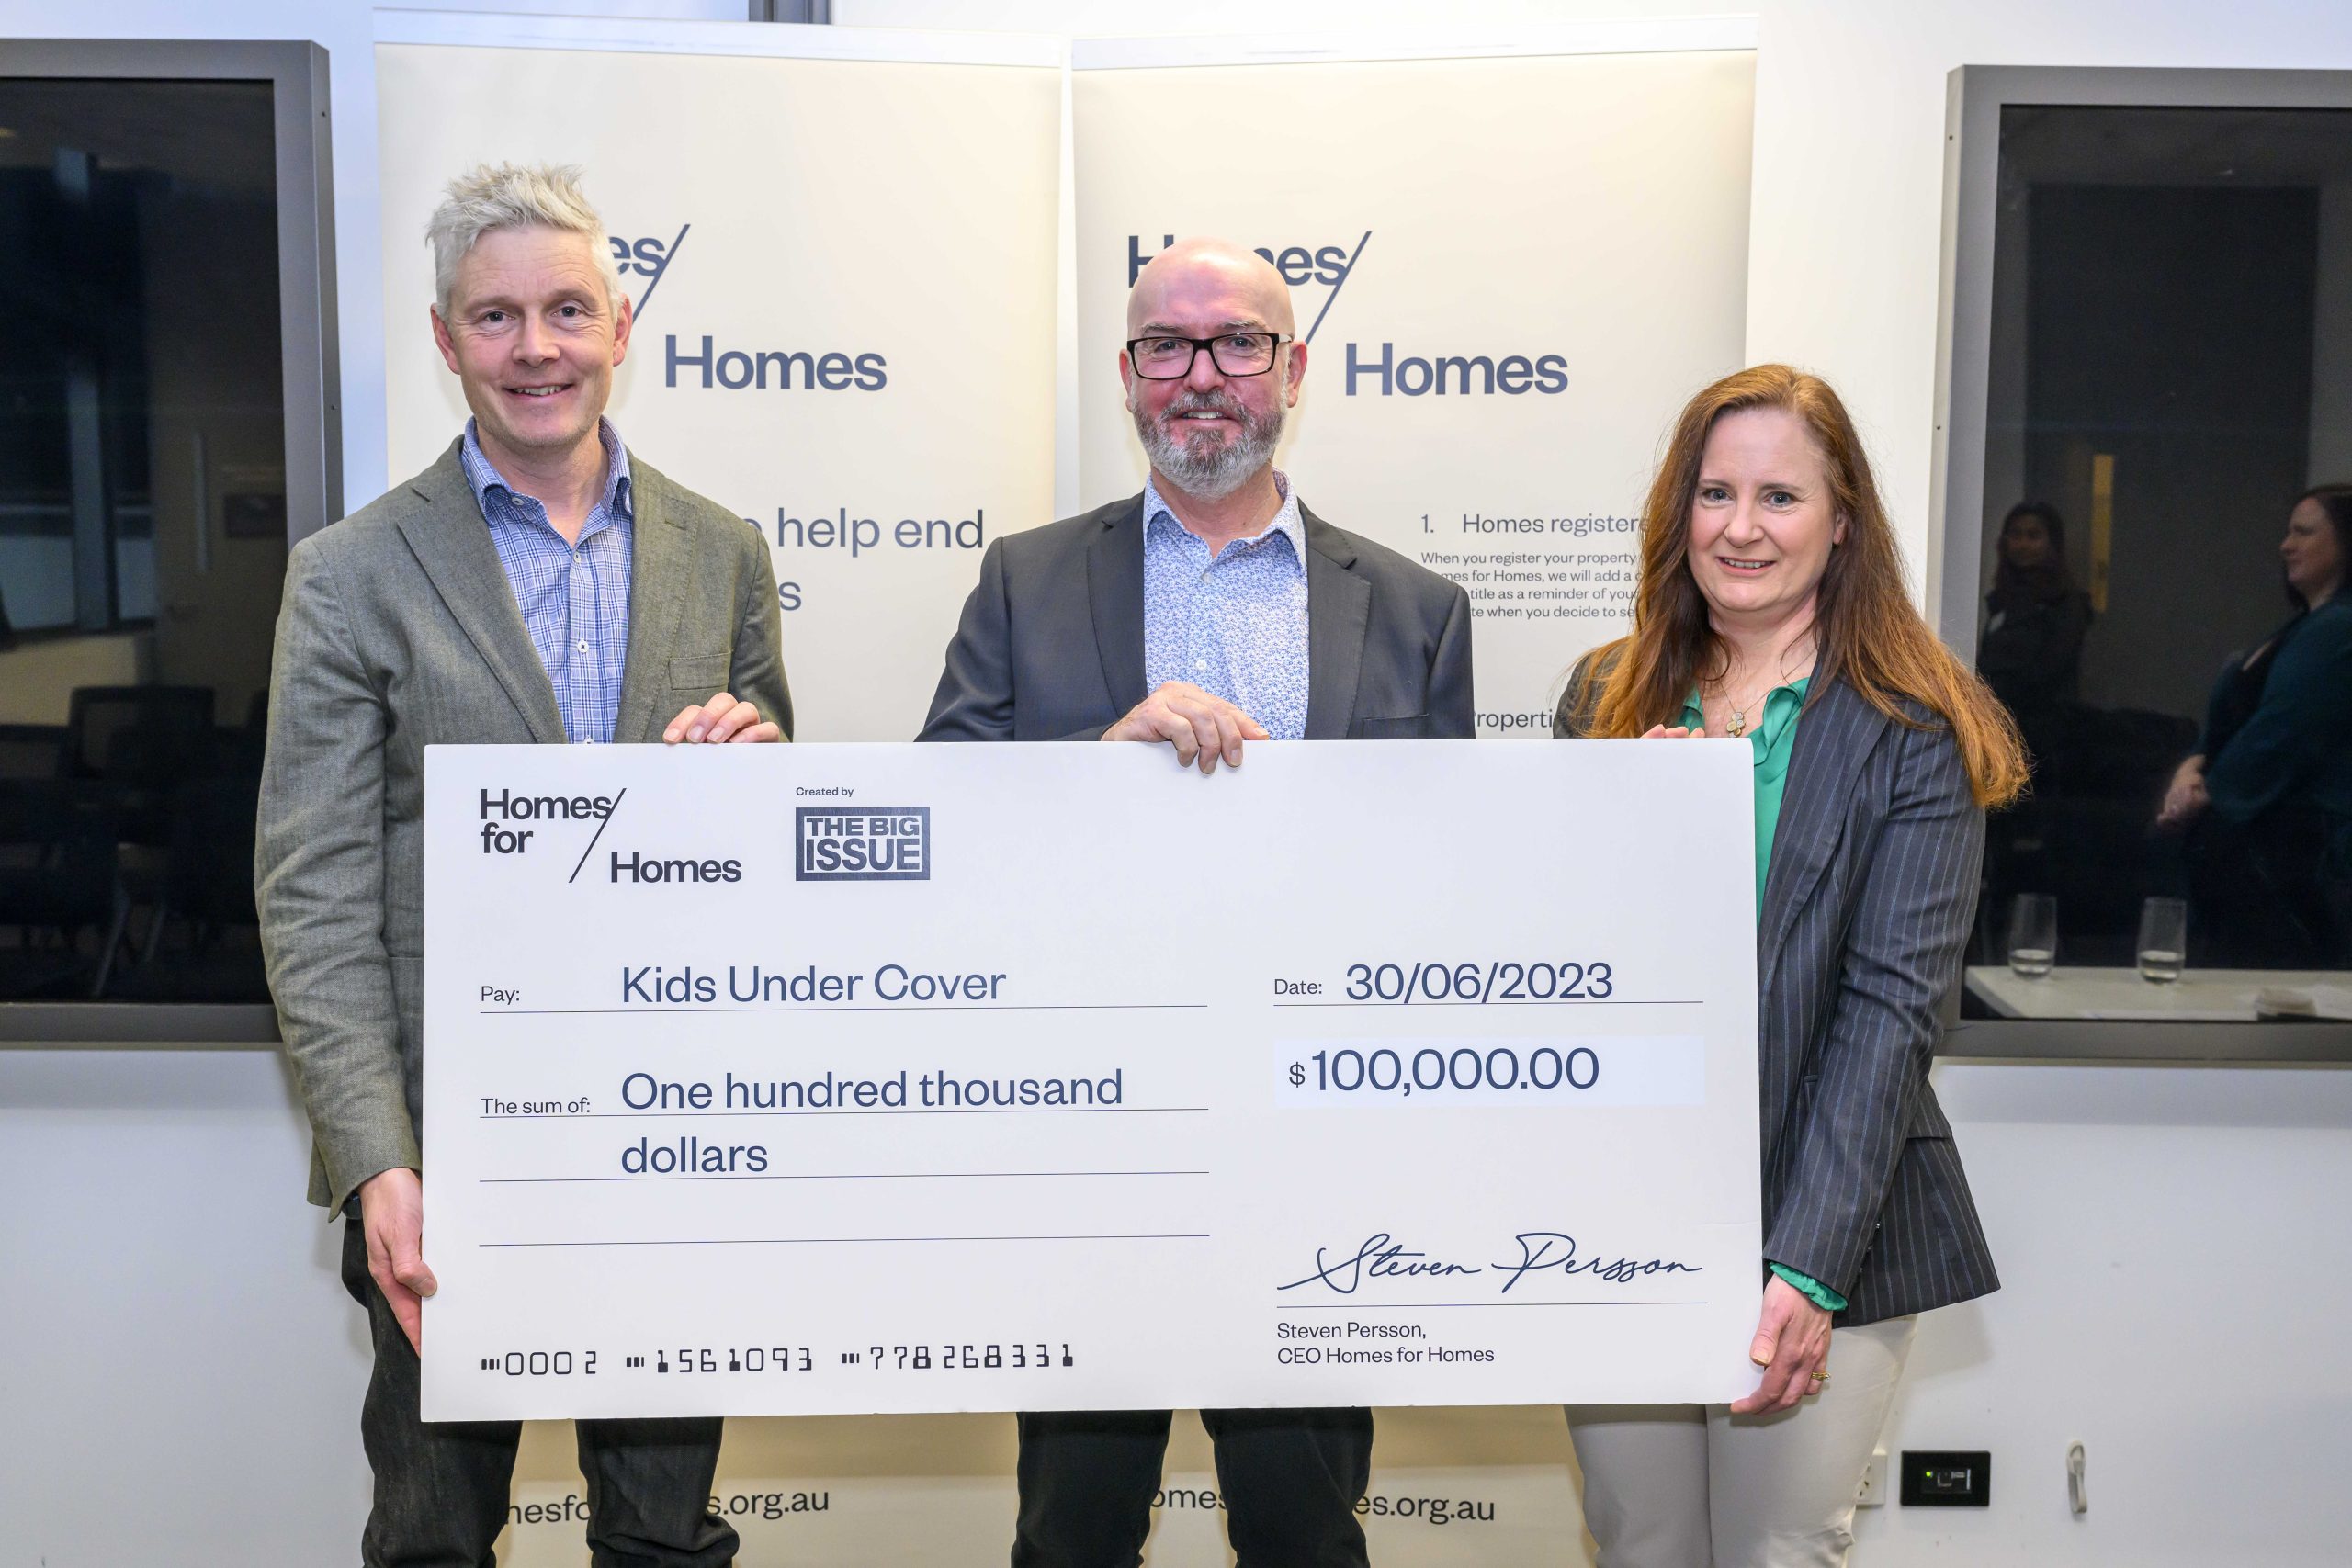 Jason Shaw from Balcon presents a cheque to Homes for Homes to support Kids Under Cover